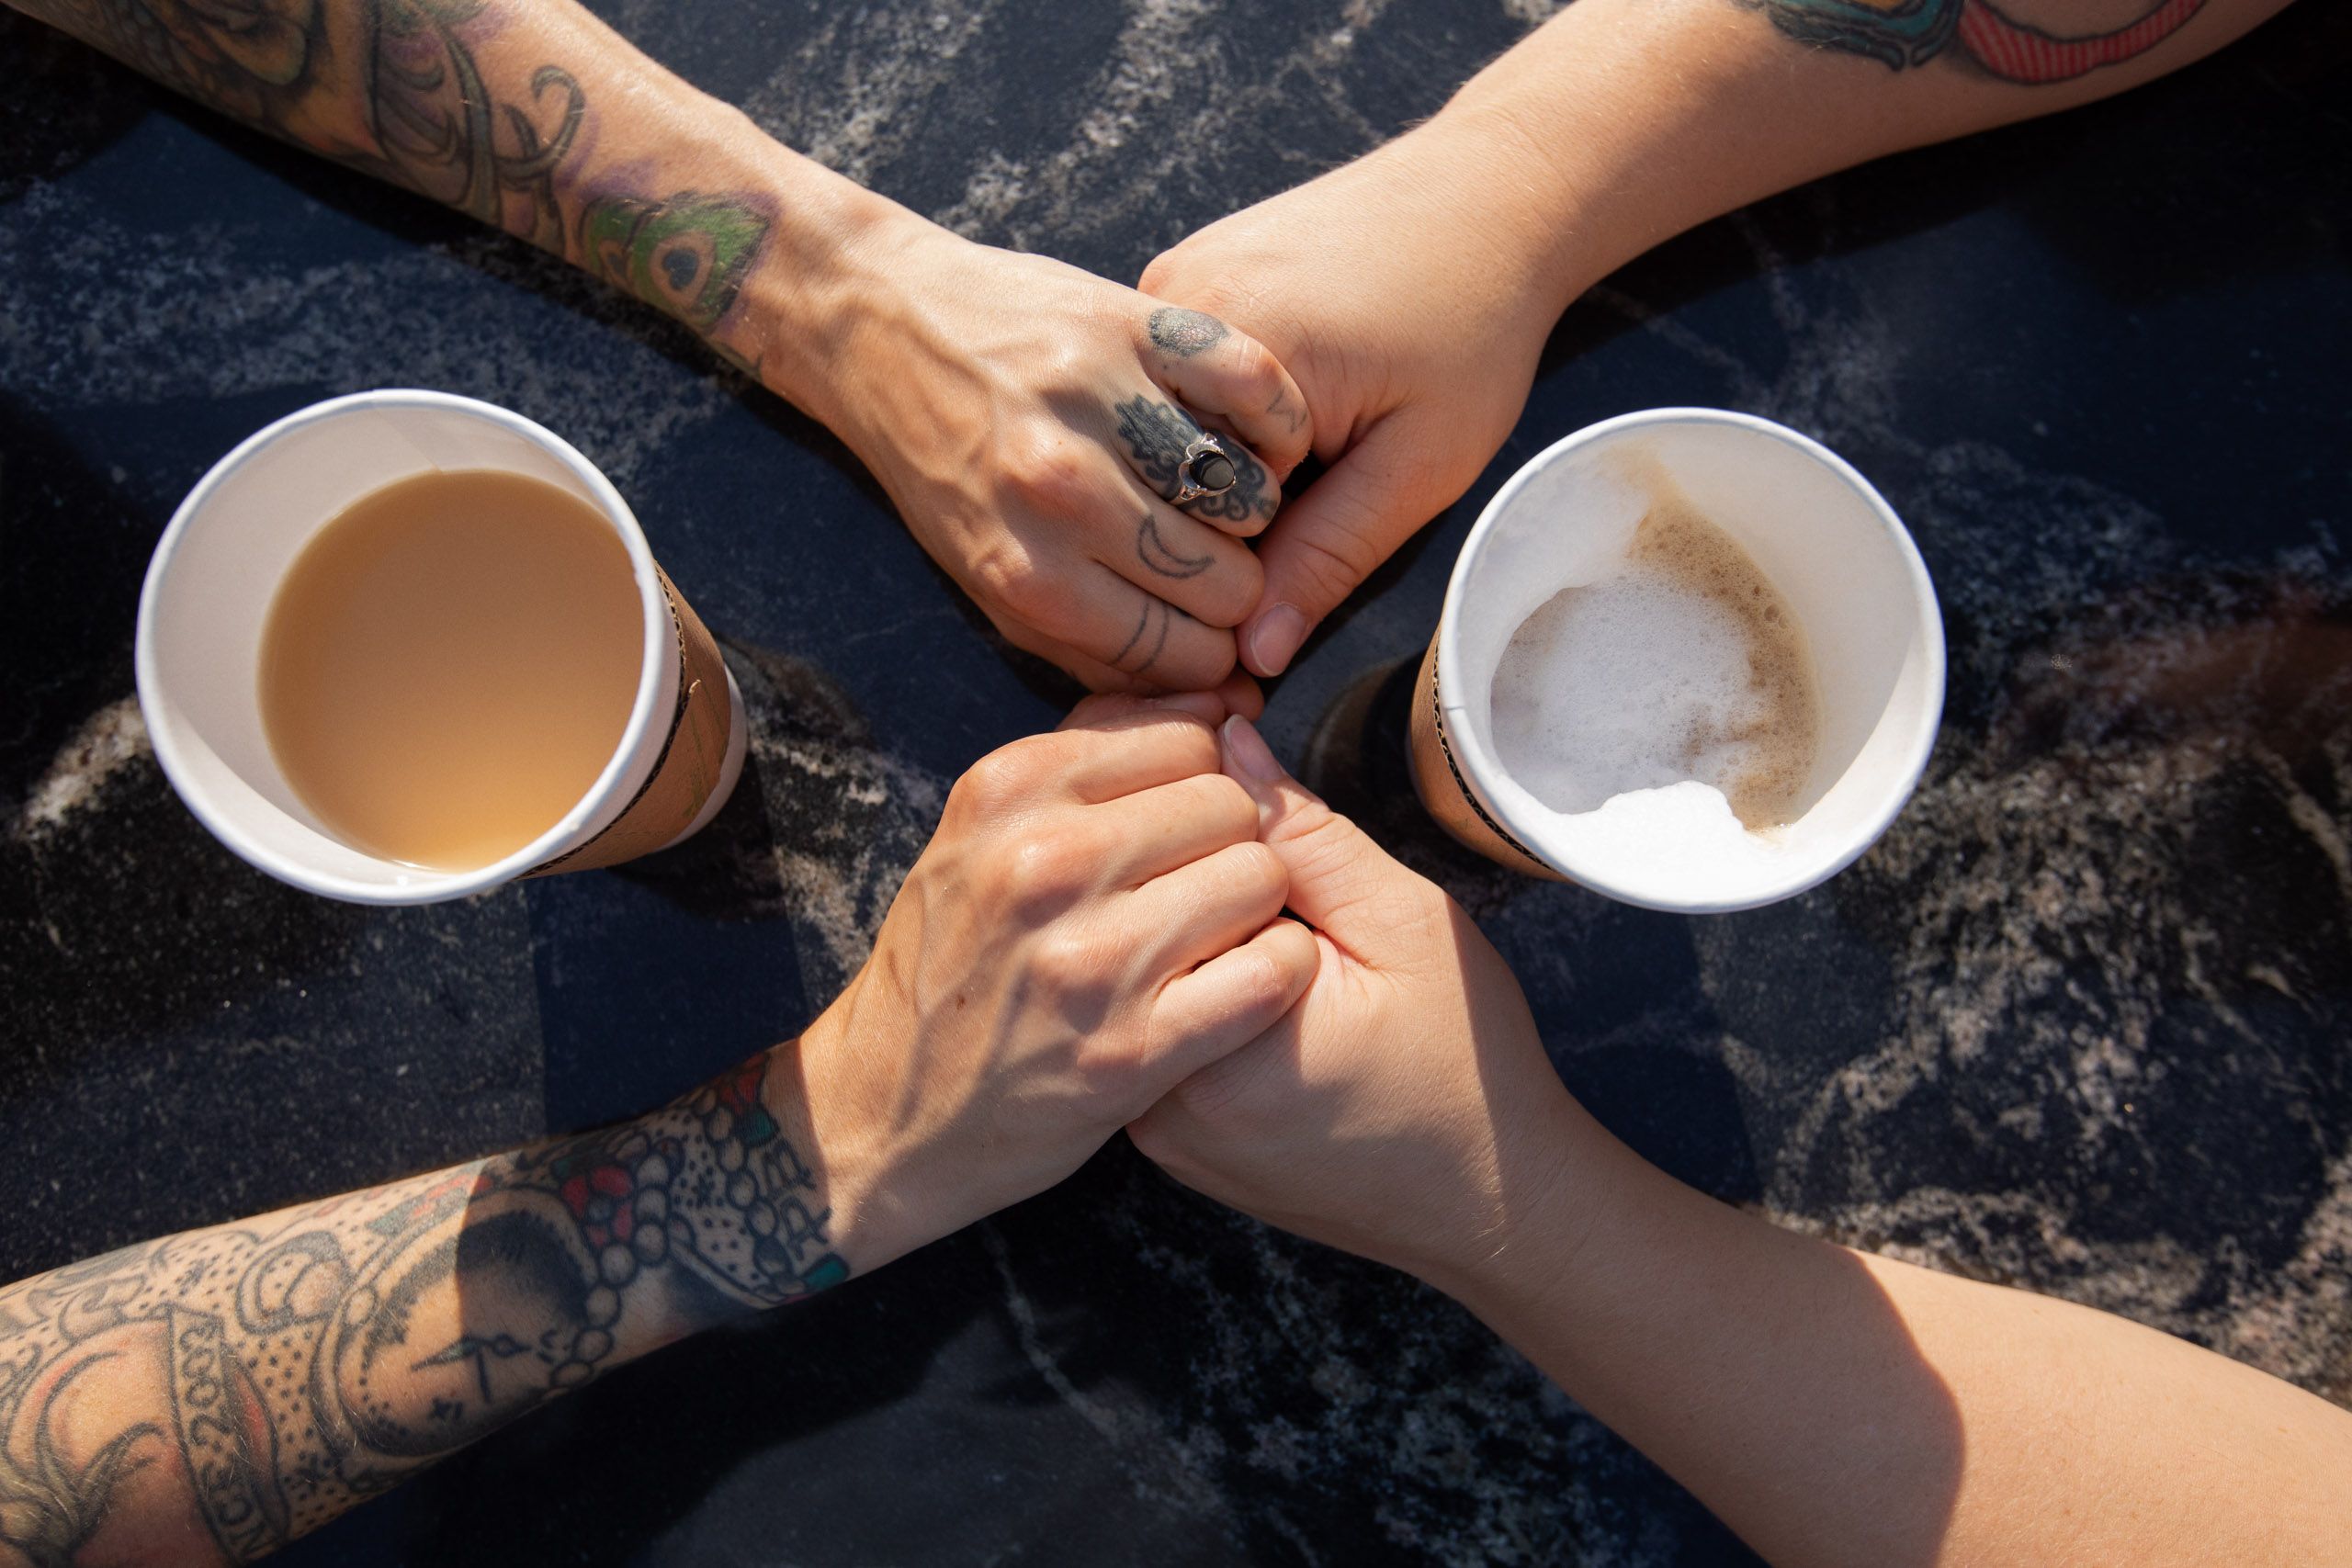 Couple at Coffee Holding Hands